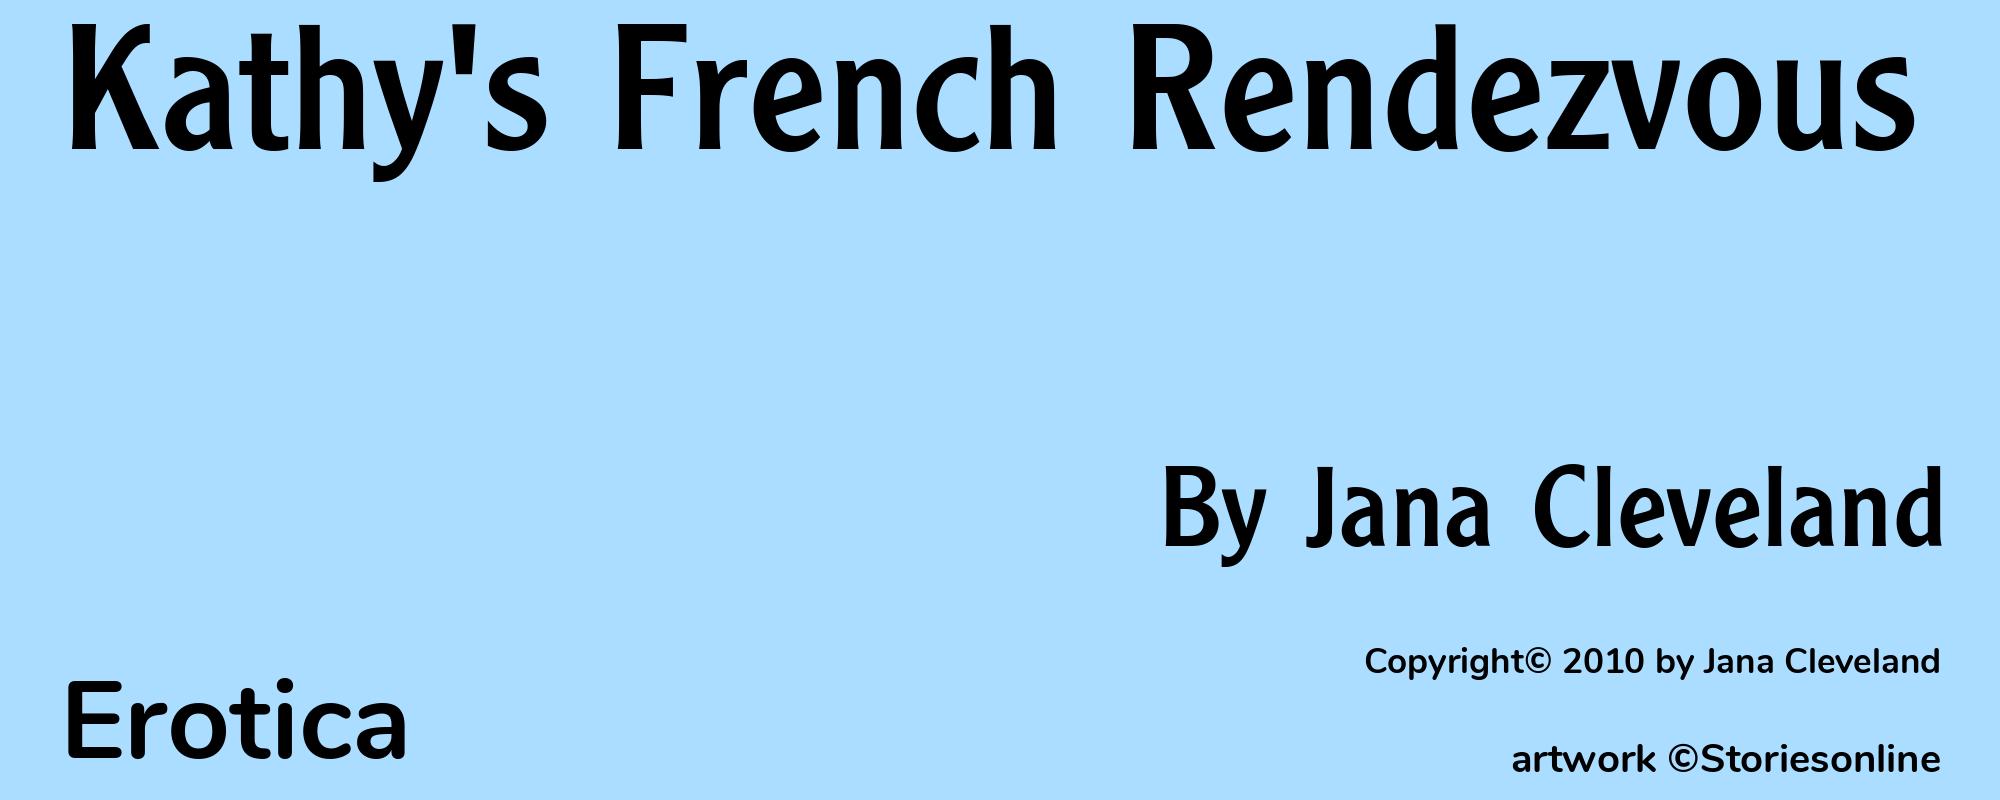 Kathy's French Rendezvous - Cover